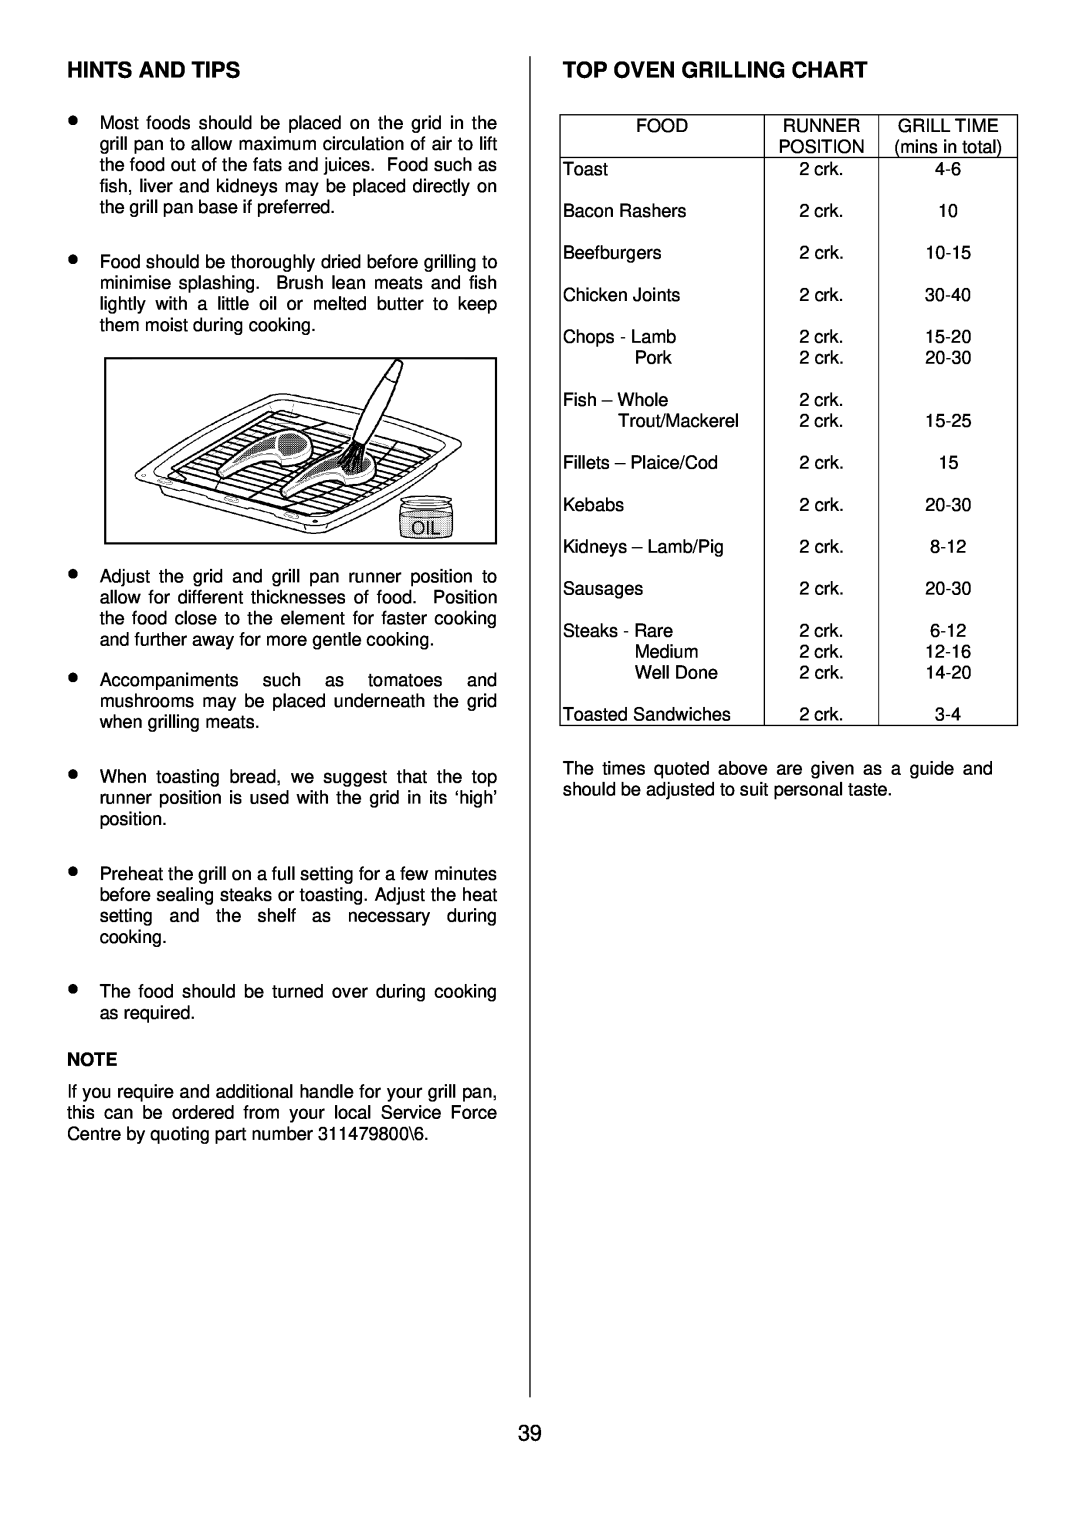 Zanussi ZDQ 895 manual Top Oven Grilling Chart, Hints And Tips 